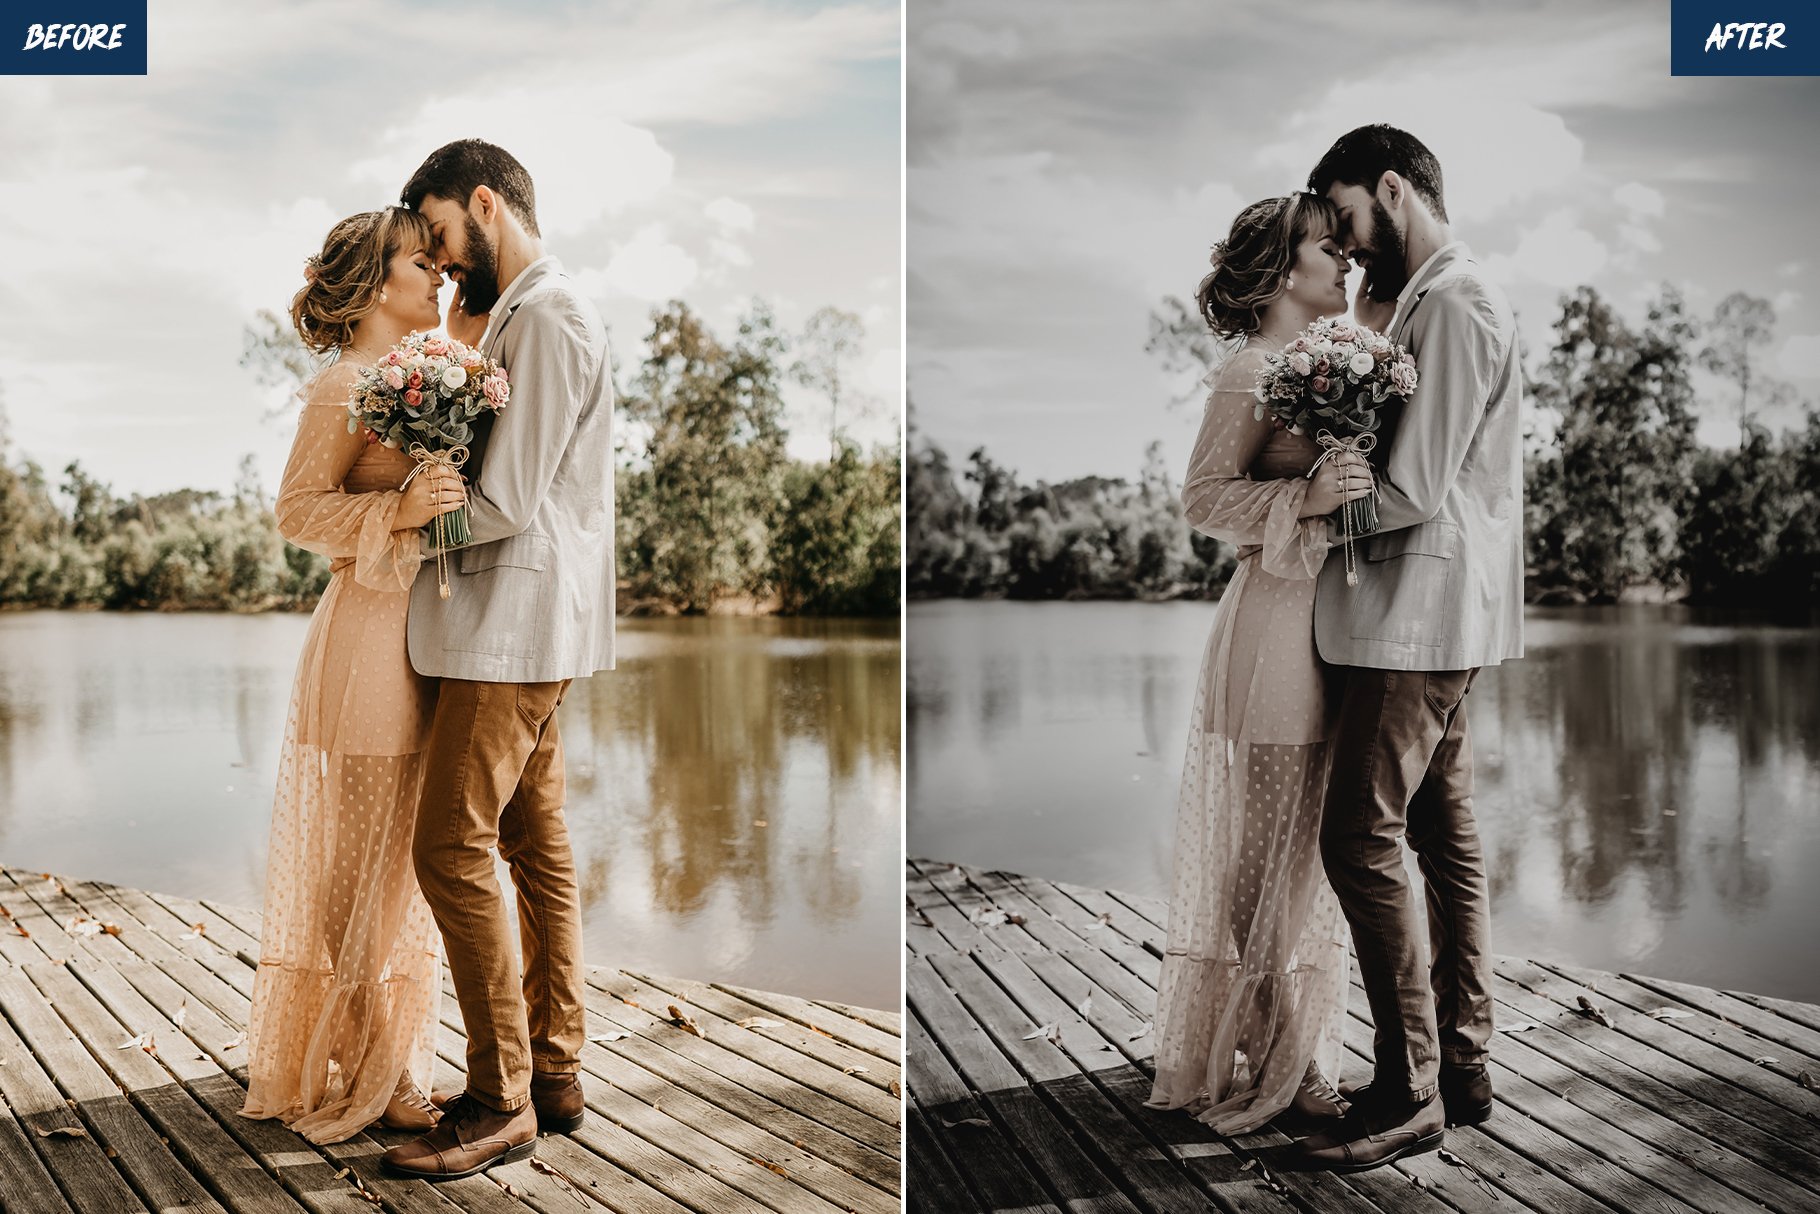 dark and moody wedding presets before and after 04 440